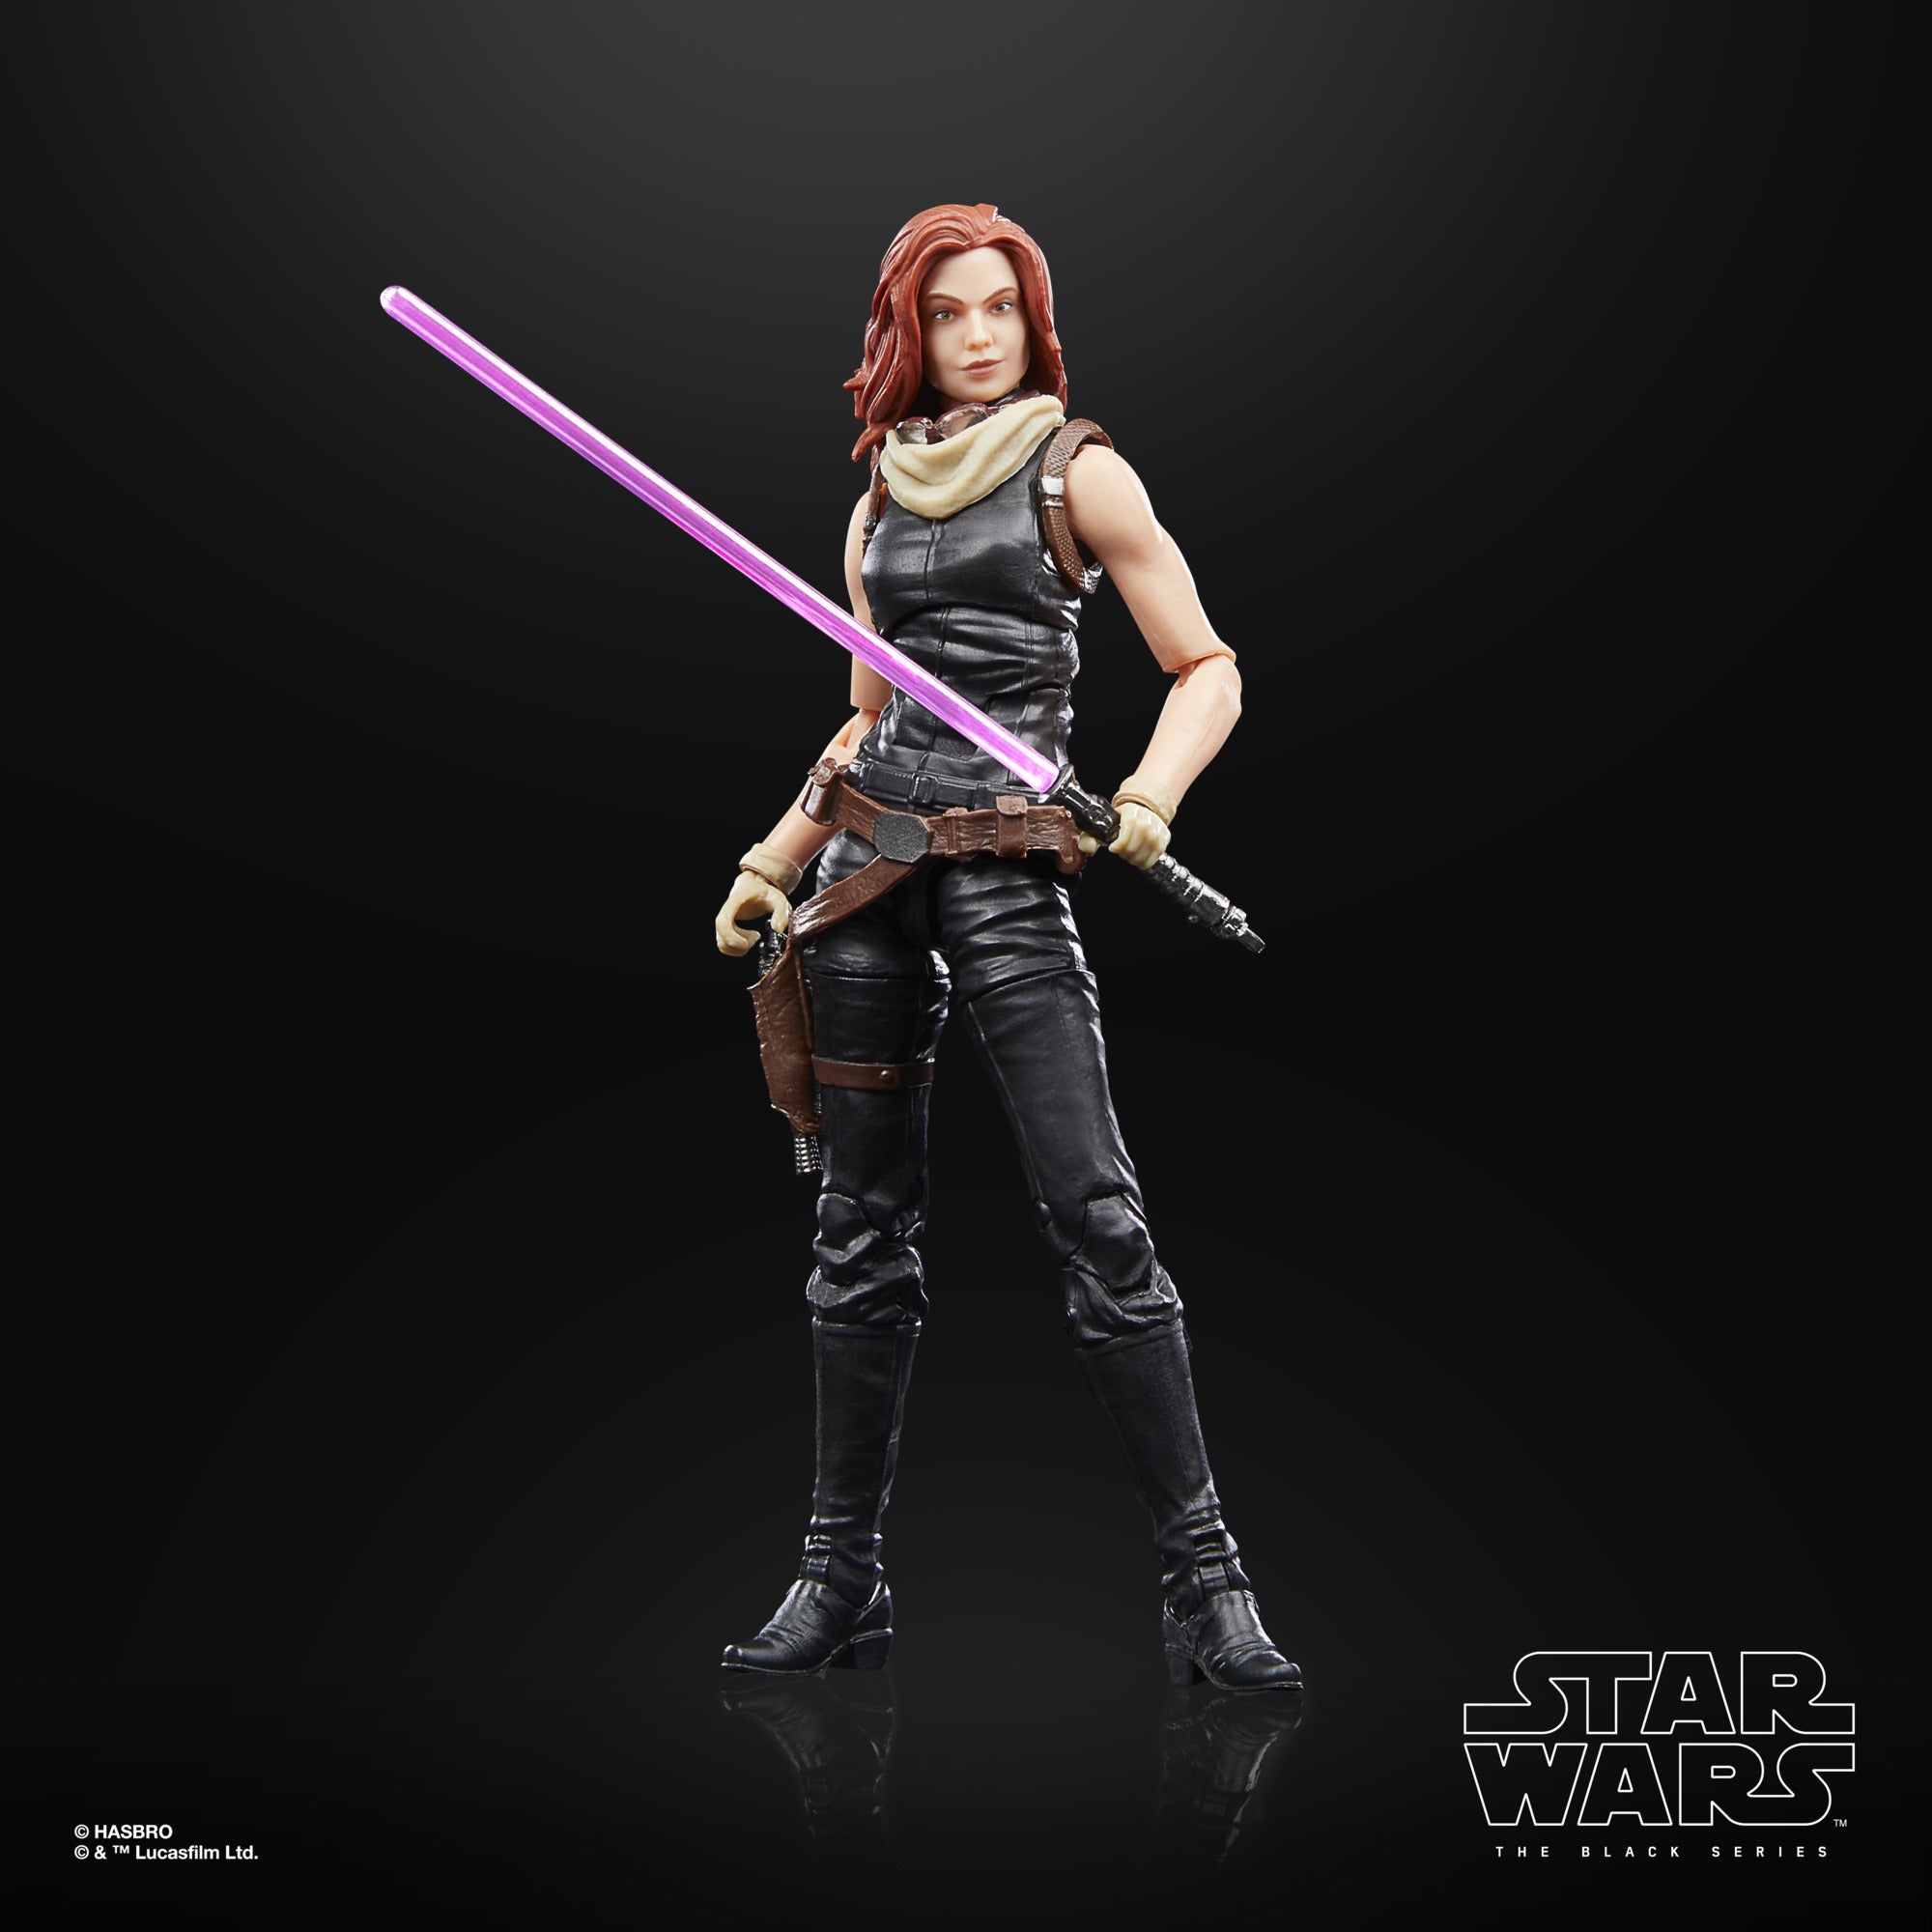 Let Me Solo Her Custom Action Figure! 